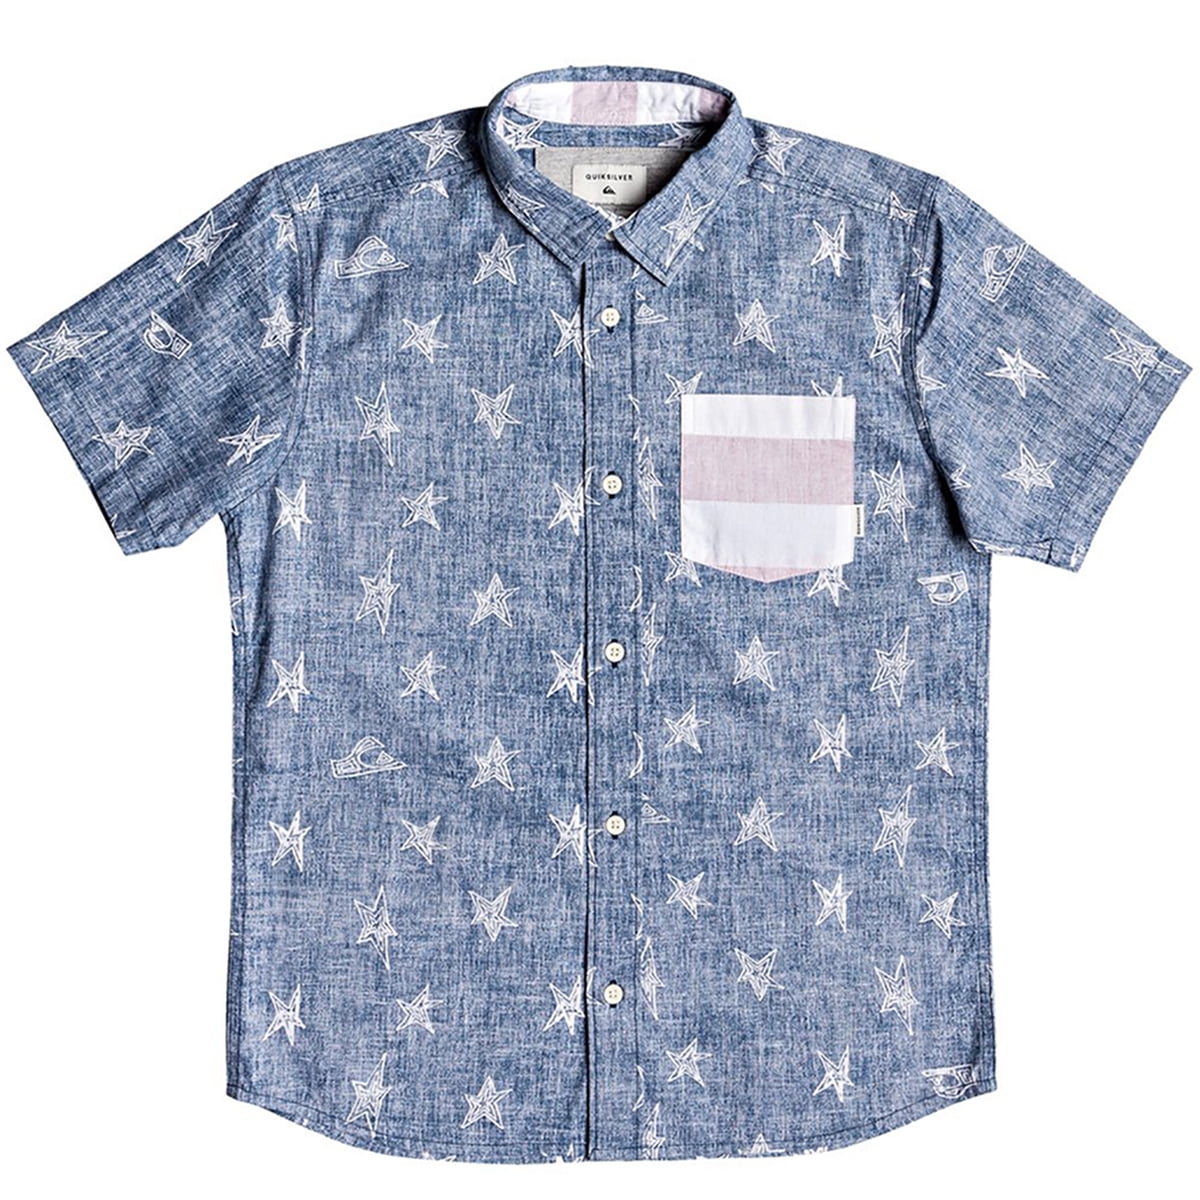 Quiksilver Boys Big 4th of July Short Sleeve Woven Youth